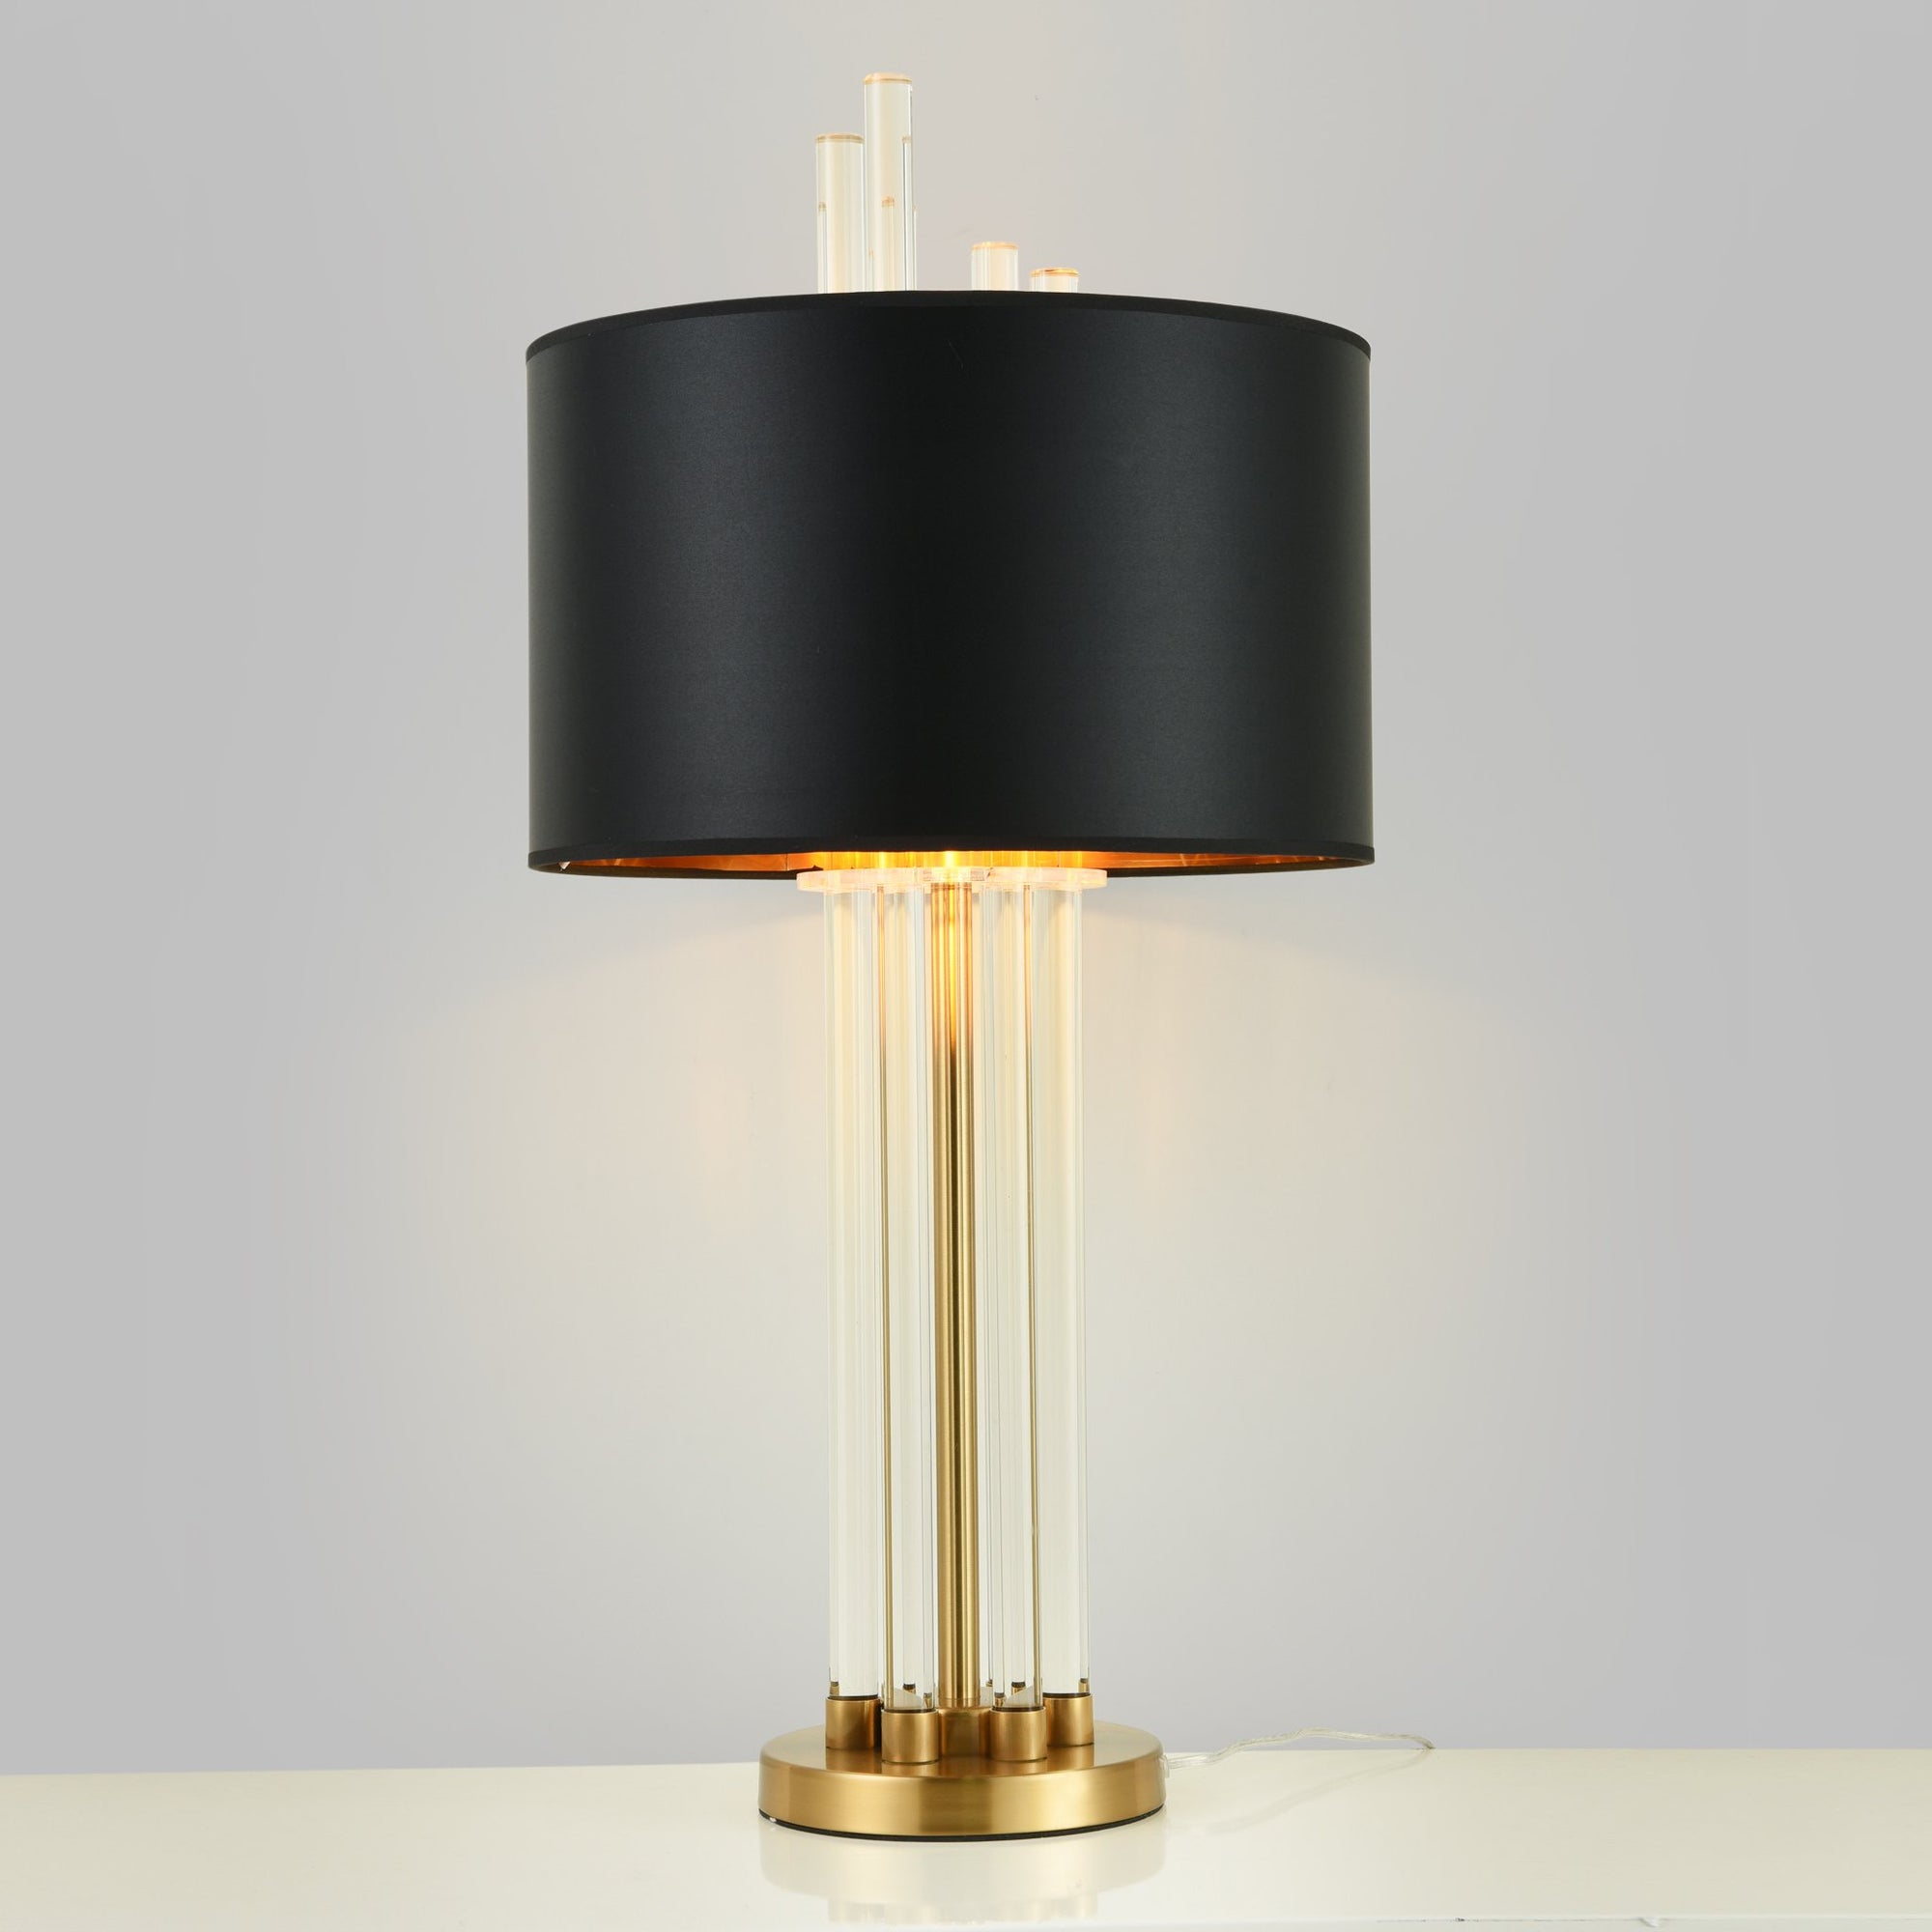 Buy Chilly Night Table Lamp online